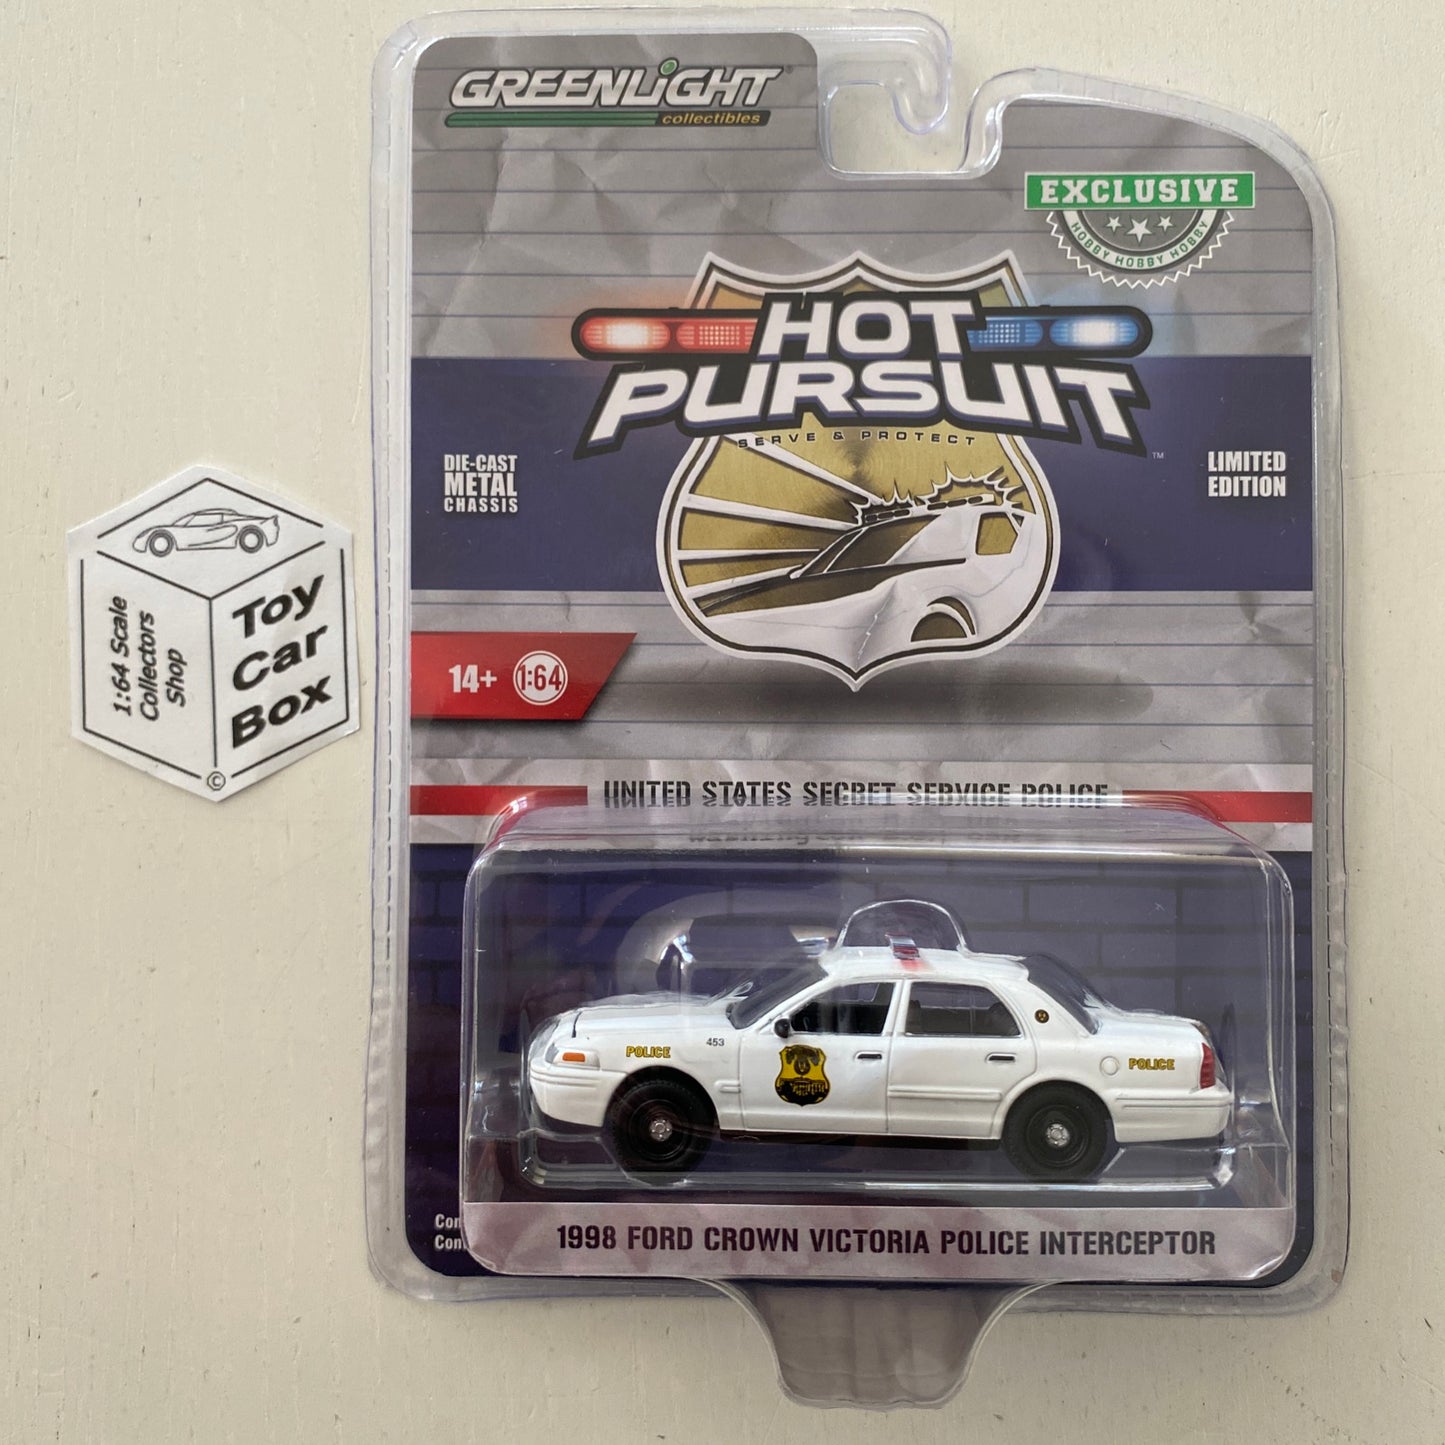 GREENLIGHT - 1998 Ford Crown Victoria (US Secret Service Police - Hot Pursuit - Hobby Exclusive) J95